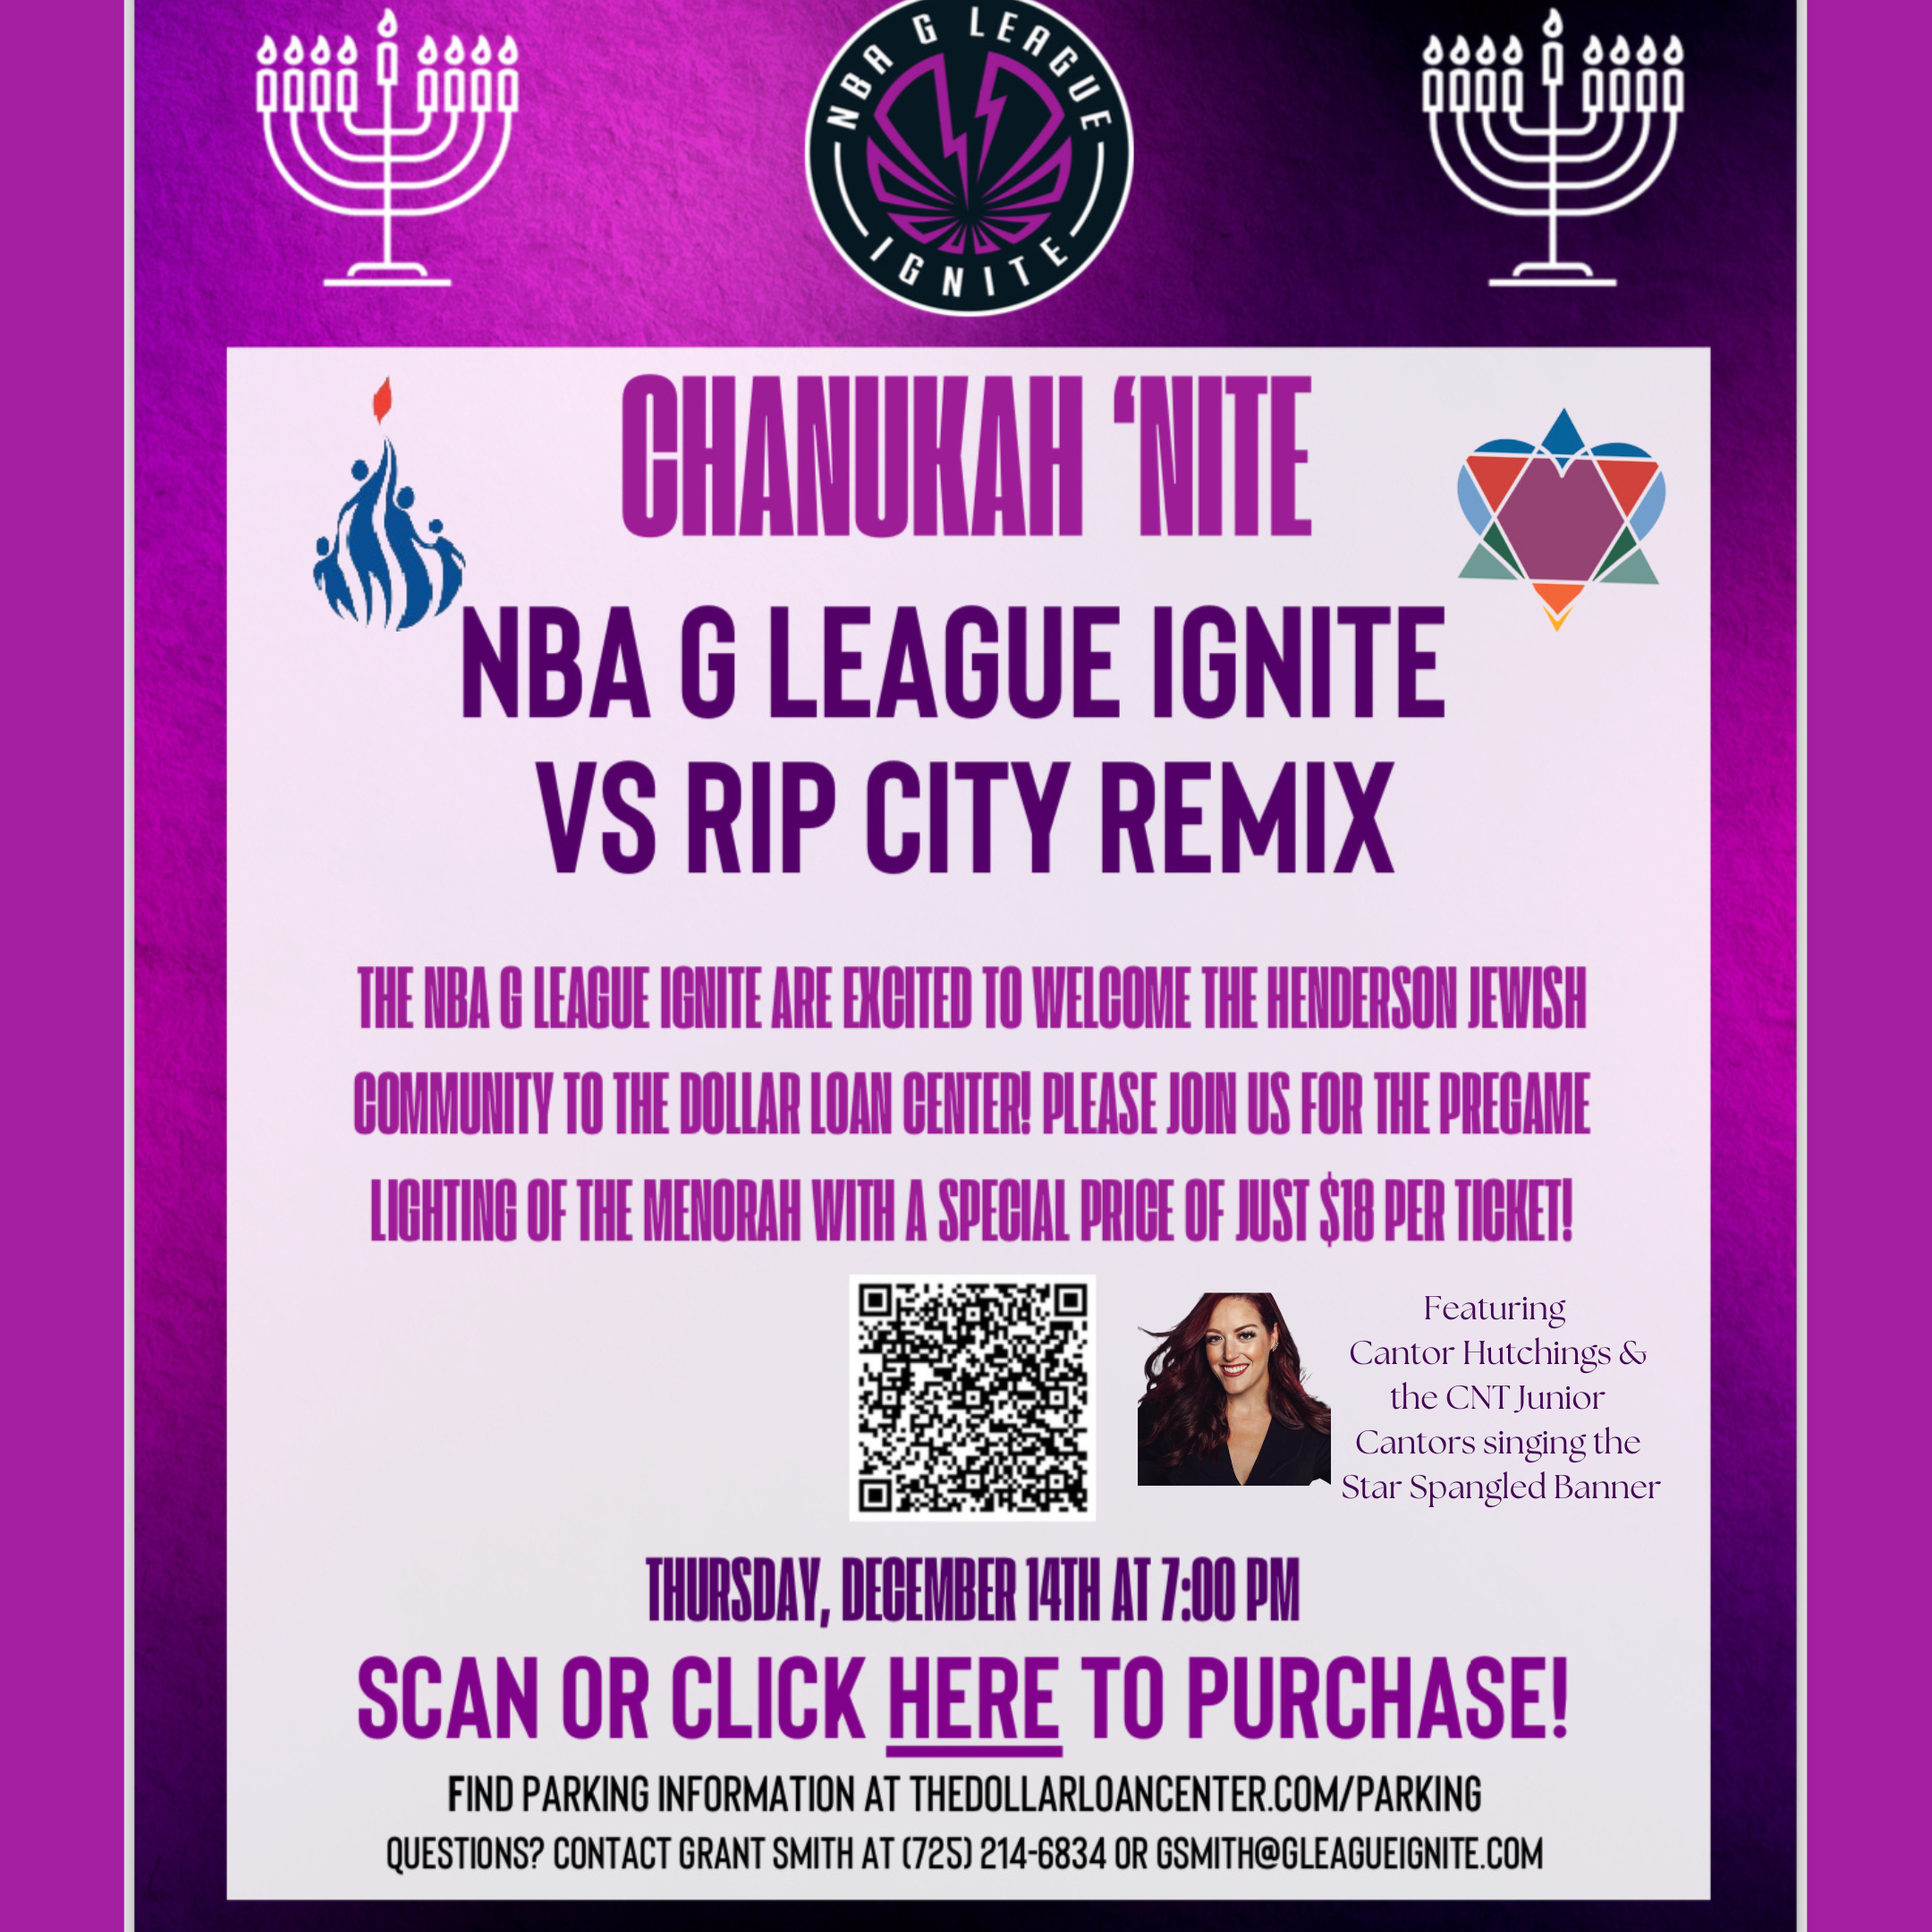 CHANUKAH MENORAH LIGHTING AT THE DOLLAR LOAN CENTER – CANTOR HUTCHINGS WILL SING THE NATIONAL ANTHEM